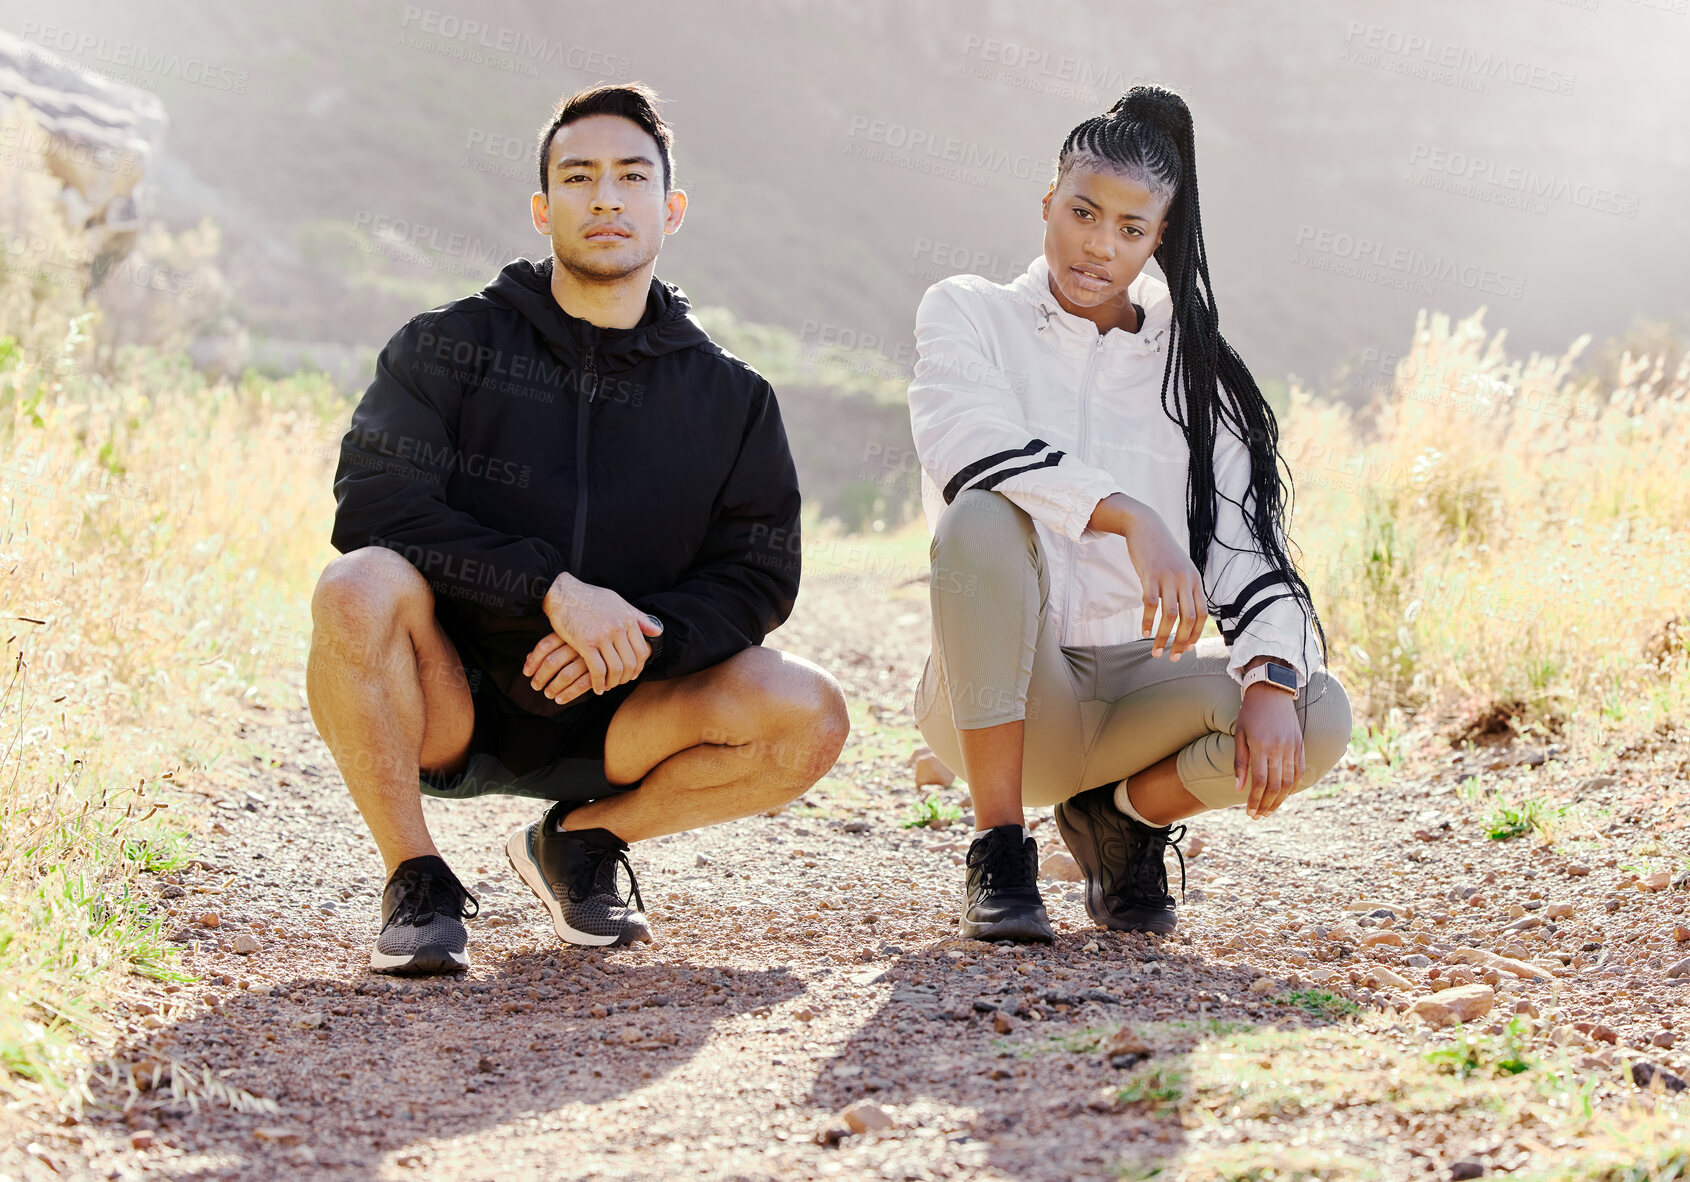 Buy stock photo Interracial couple, fitness and nature in sports motivation and fashion for healthy outdoor exercise or workout. Portrait of fit confident asian man and black woman ready on hiking trail outdoors